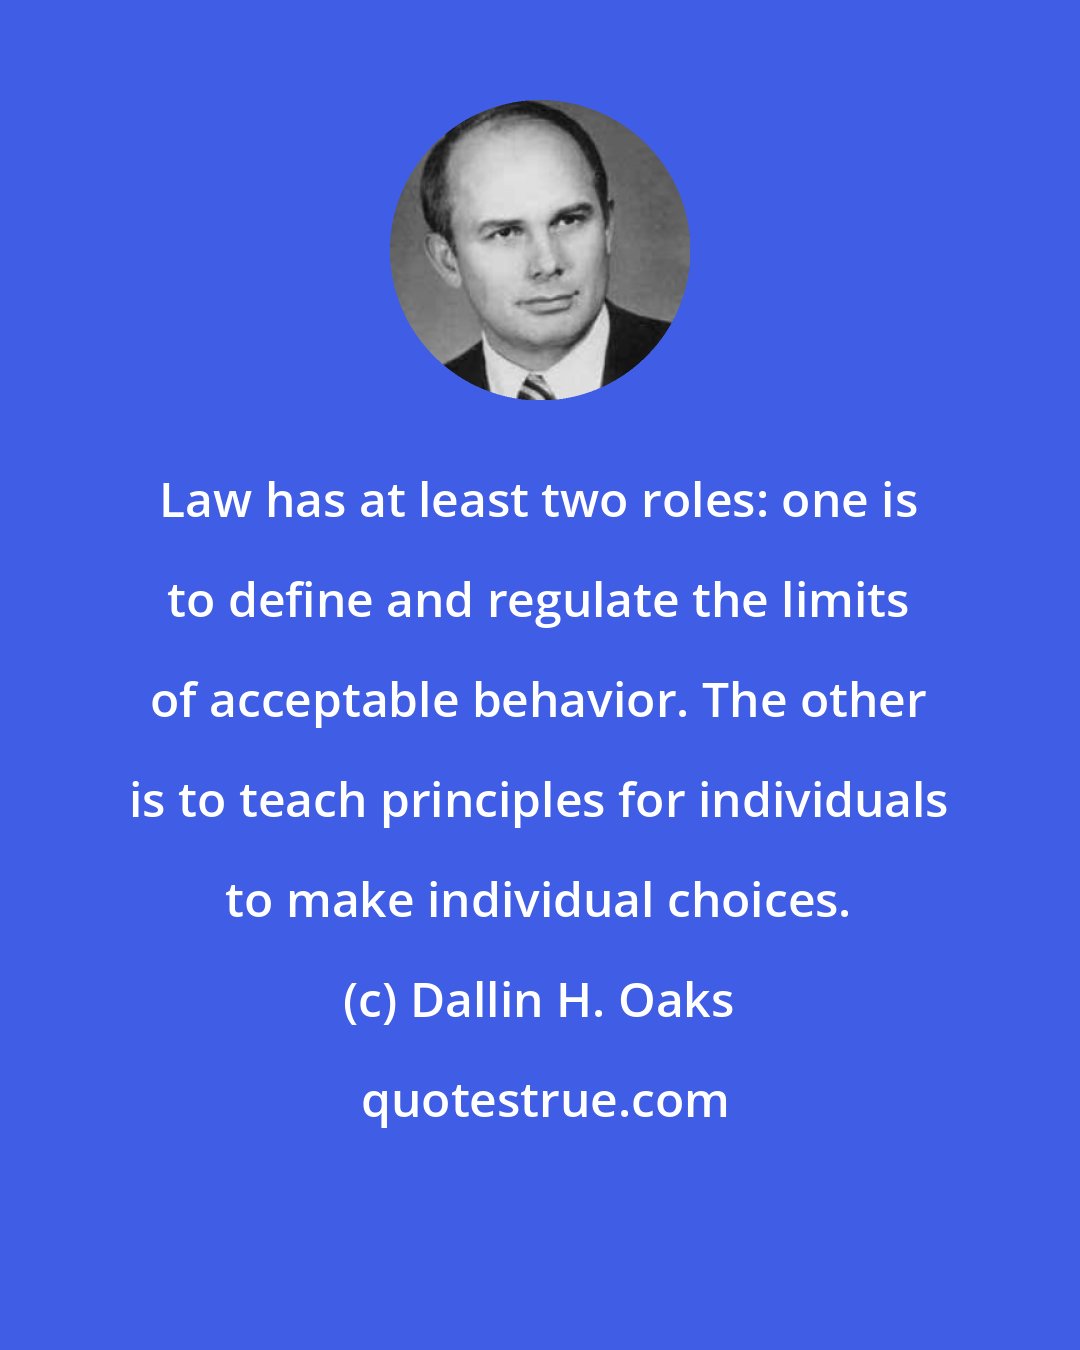 Dallin H. Oaks: Law has at least two roles: one is to define and regulate the limits of acceptable behavior. The other is to teach principles for individuals to make individual choices.